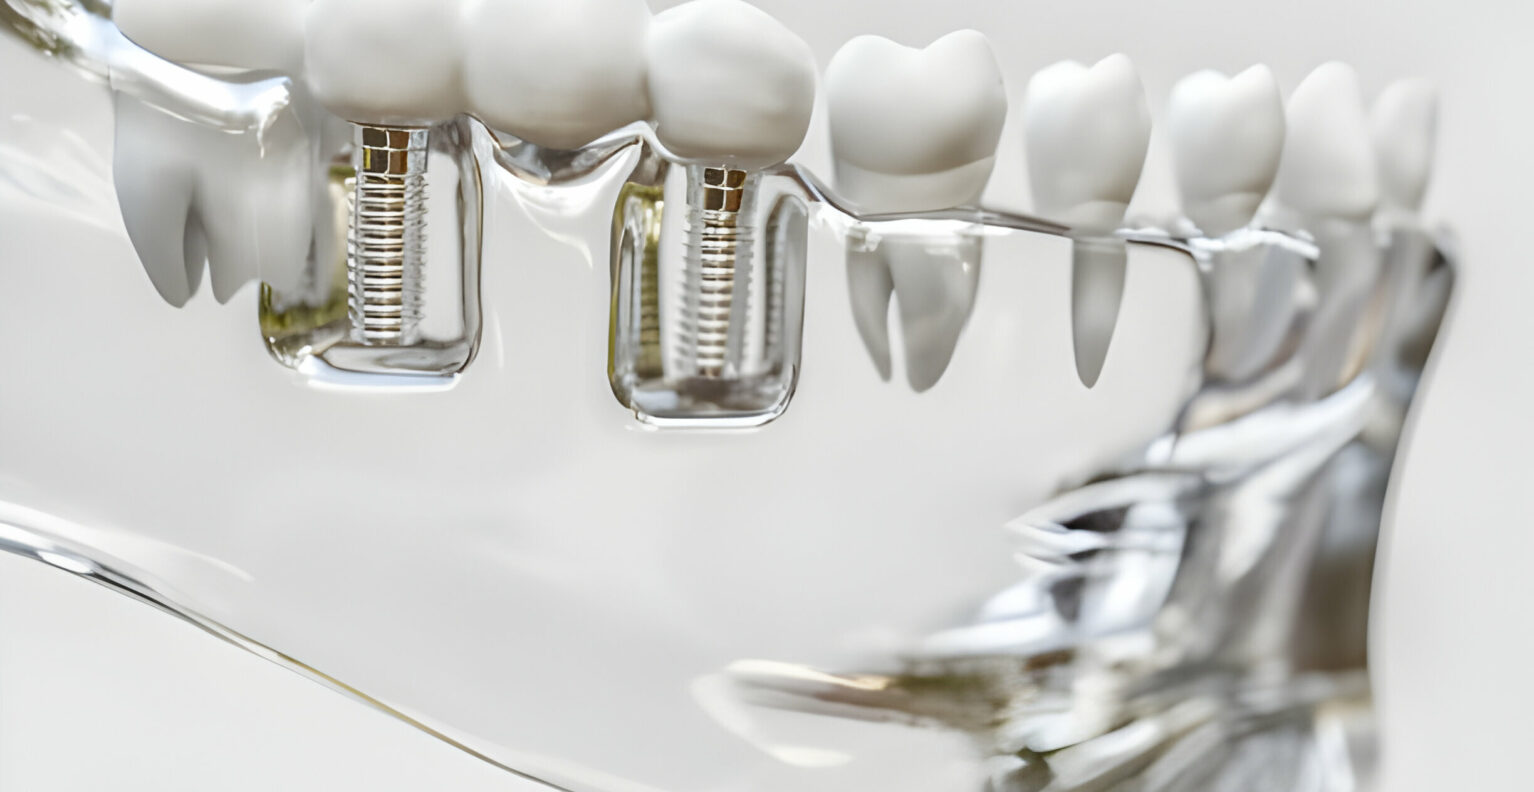 Comparing Dental Implants To Other Tooth Replacement Options_FI